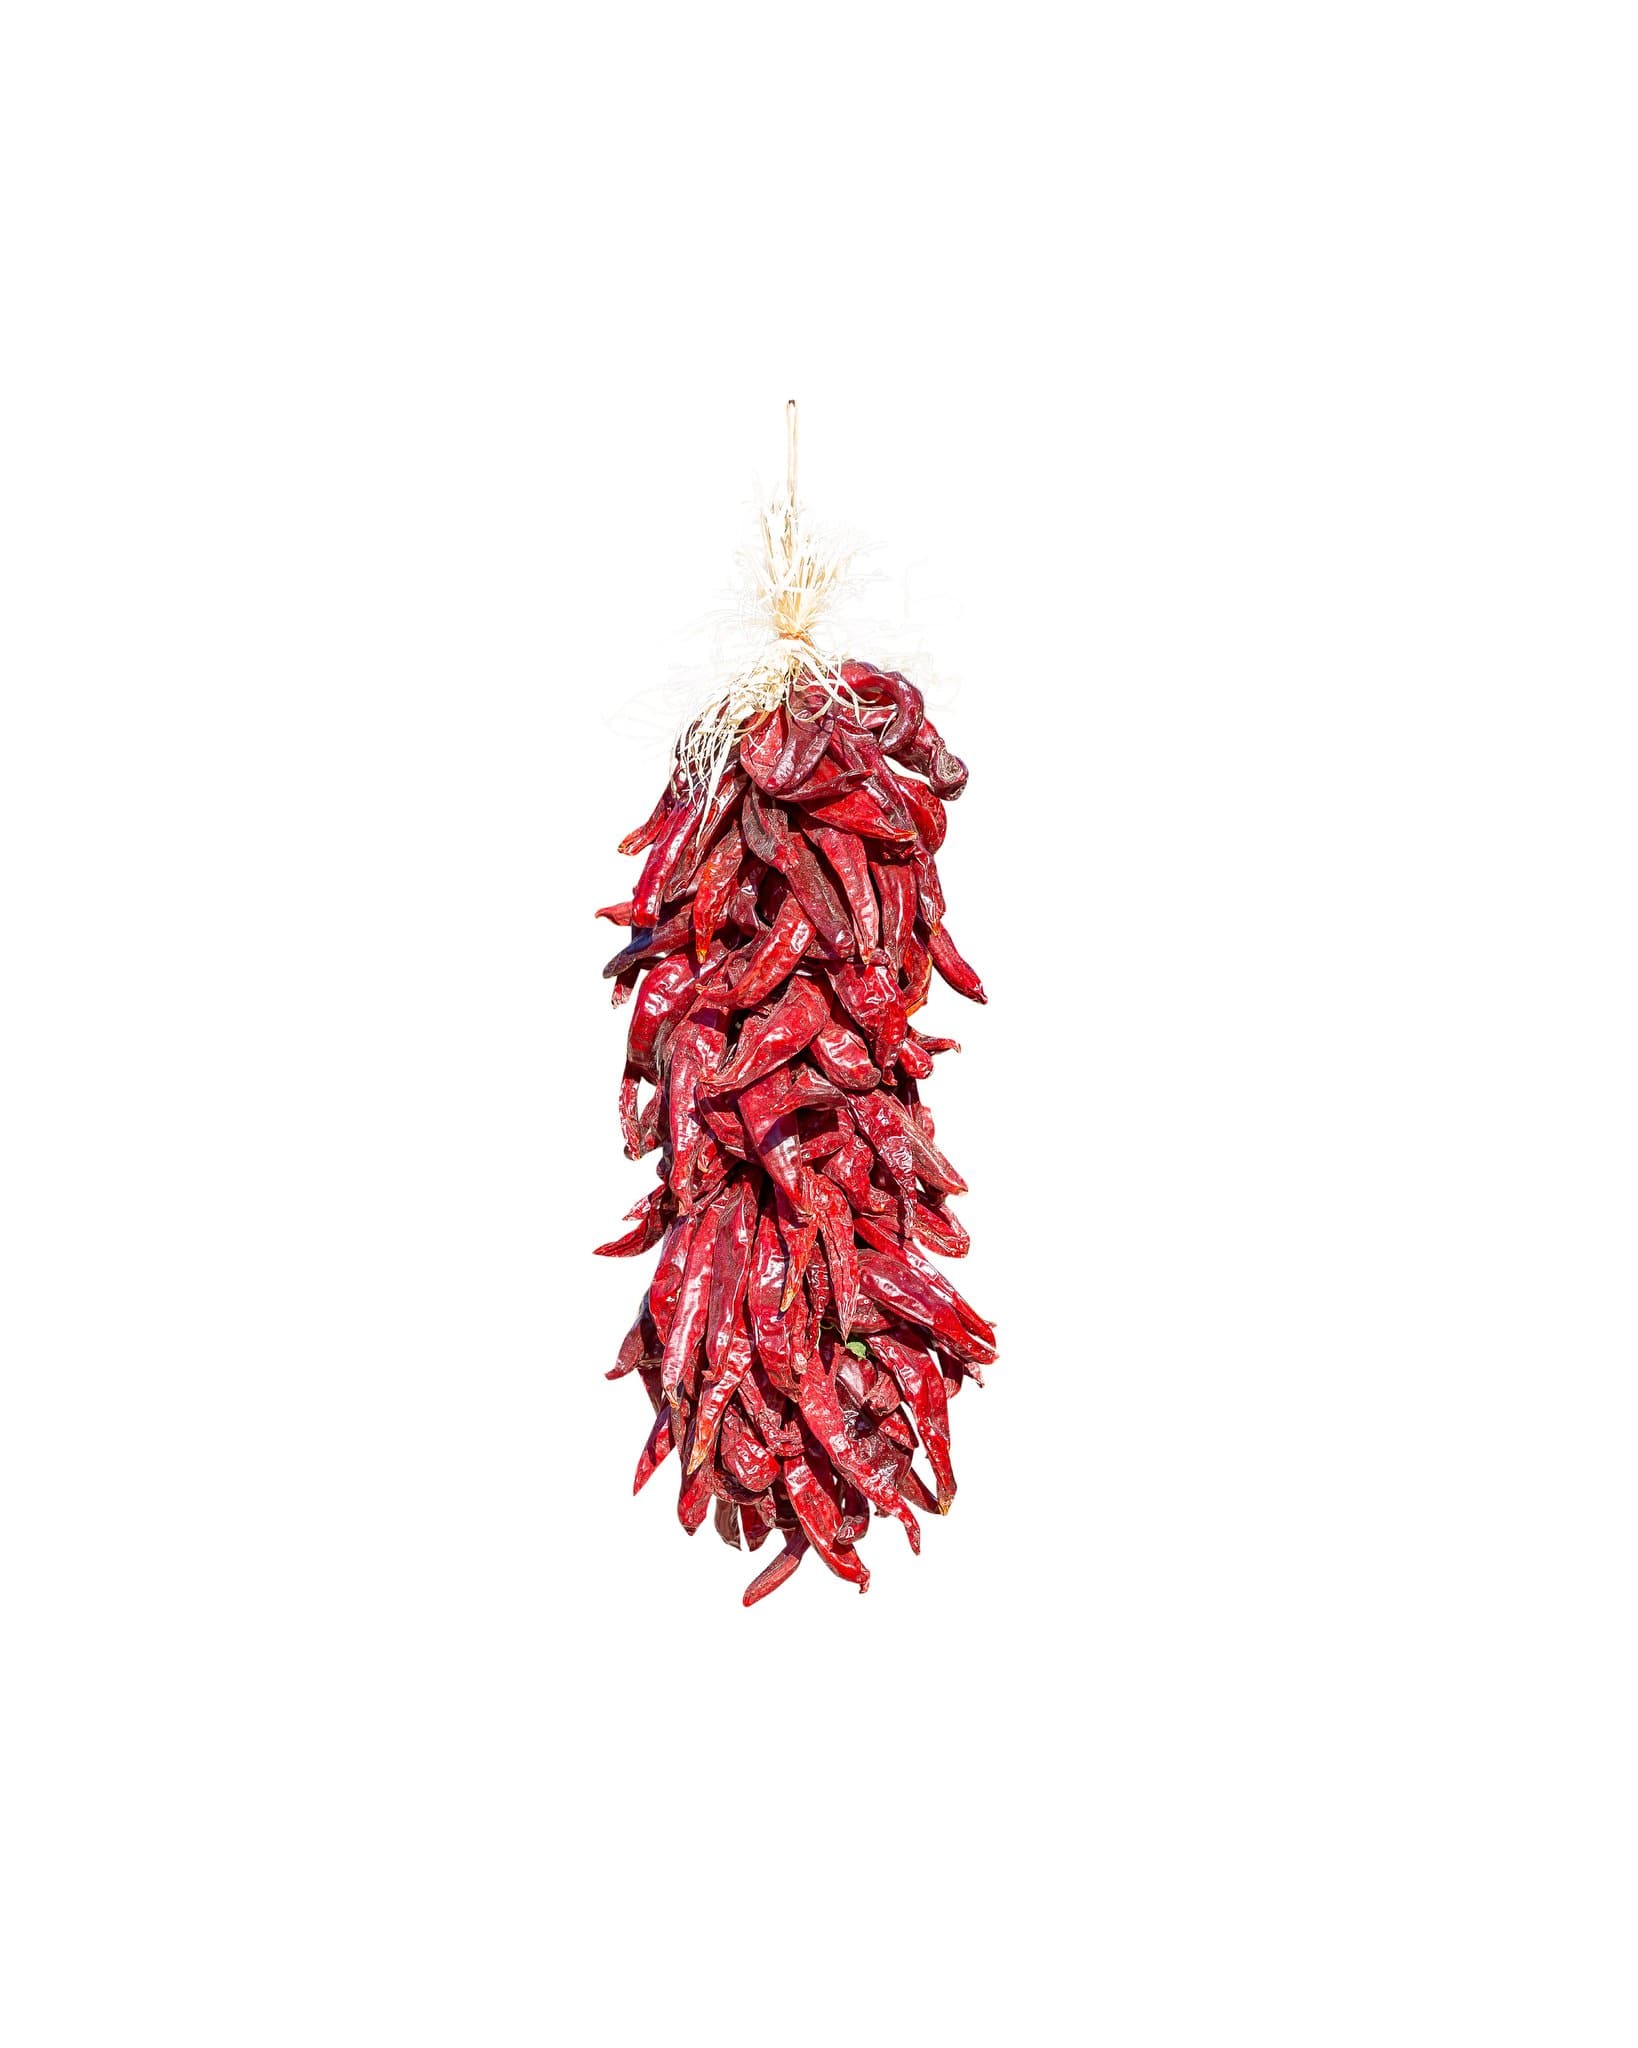 A ristra of Traditional Sandia Ristras hanging against a white background. The chilis are arranged in a dense, elongated bunch, tied at the top with twine.